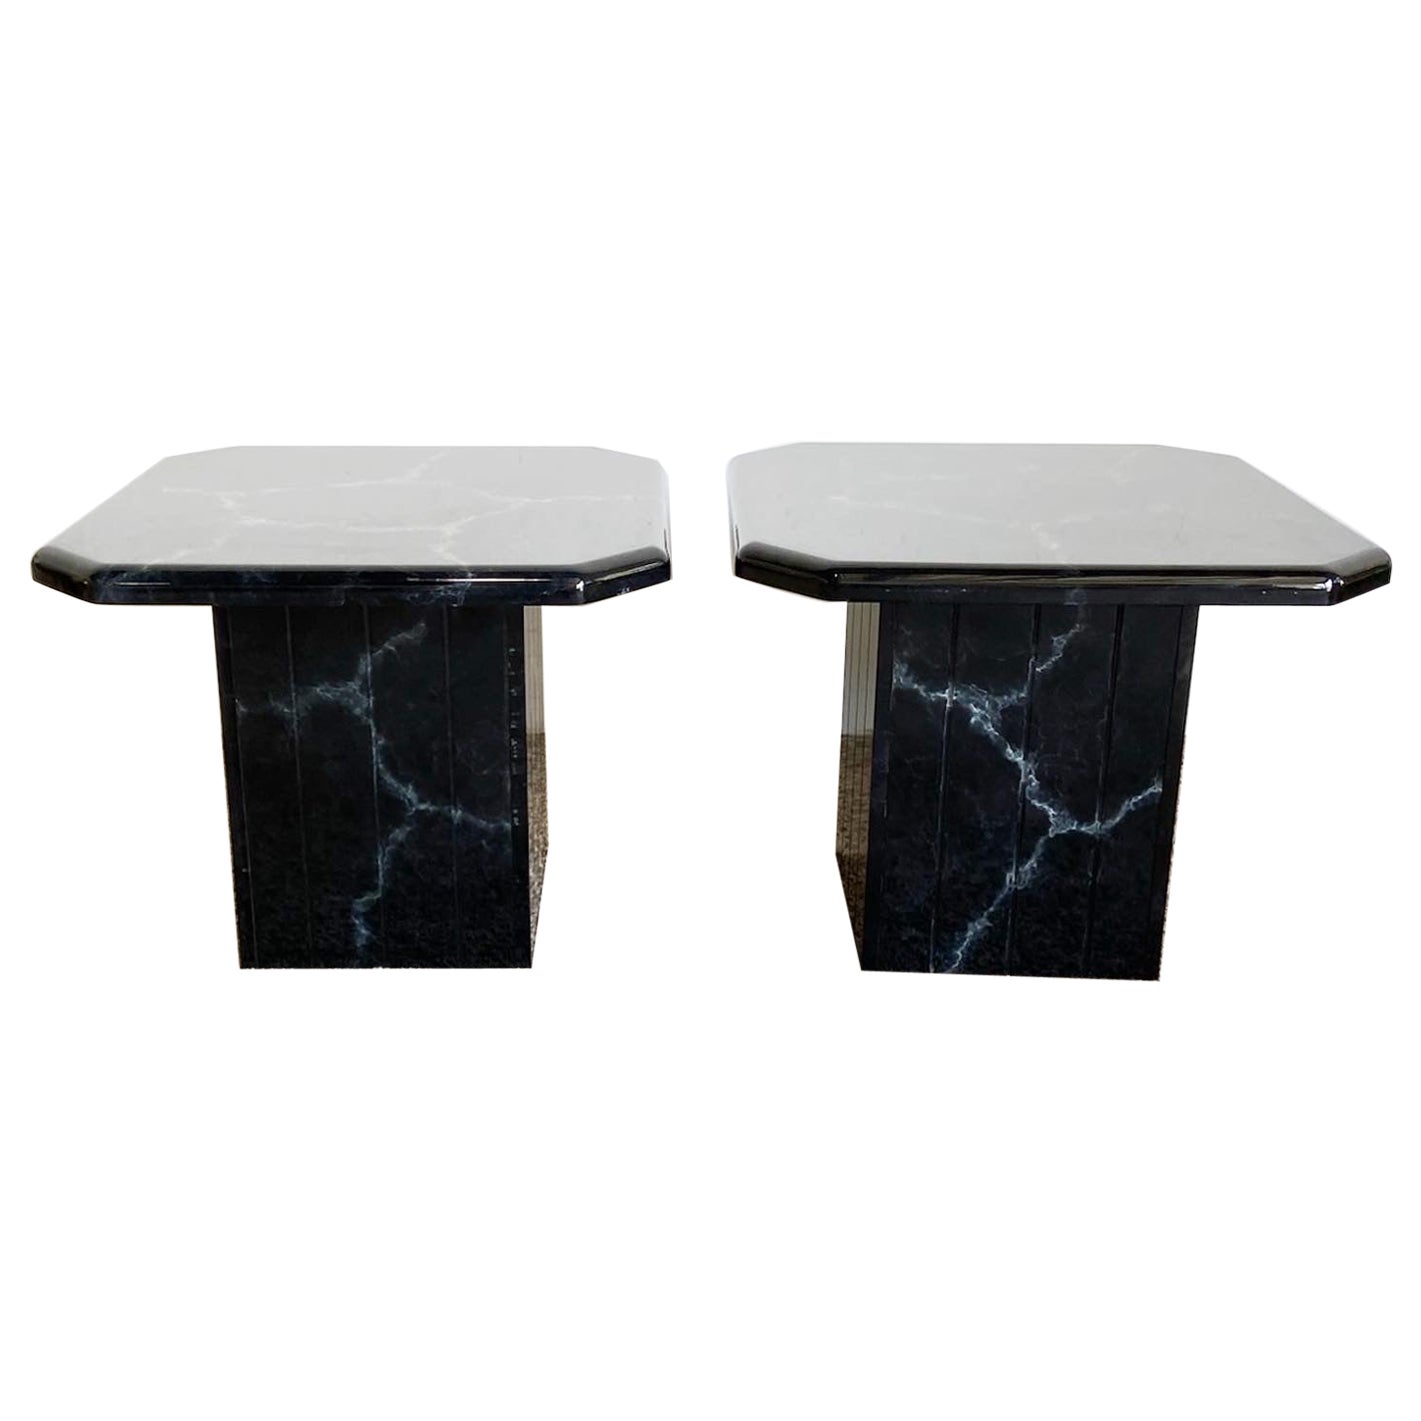 Postmodern Black Faux Marble Side Tables - a Pair